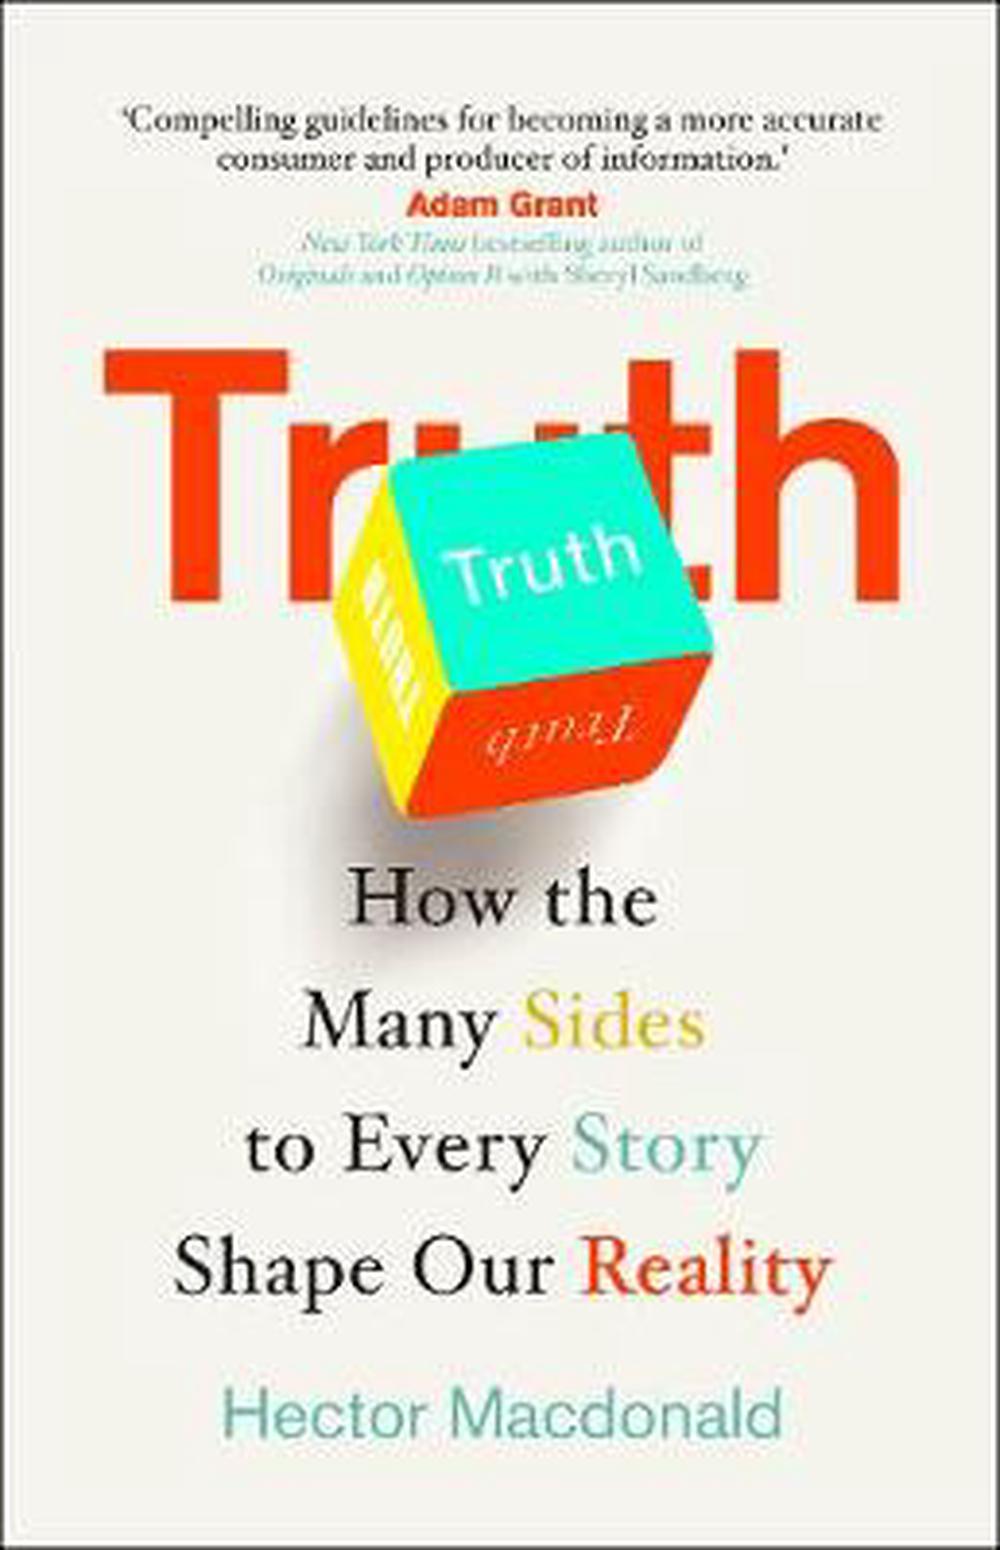 Truth by Hector Macdonald, Hardcover, 9780593079324 | Buy online at The ...